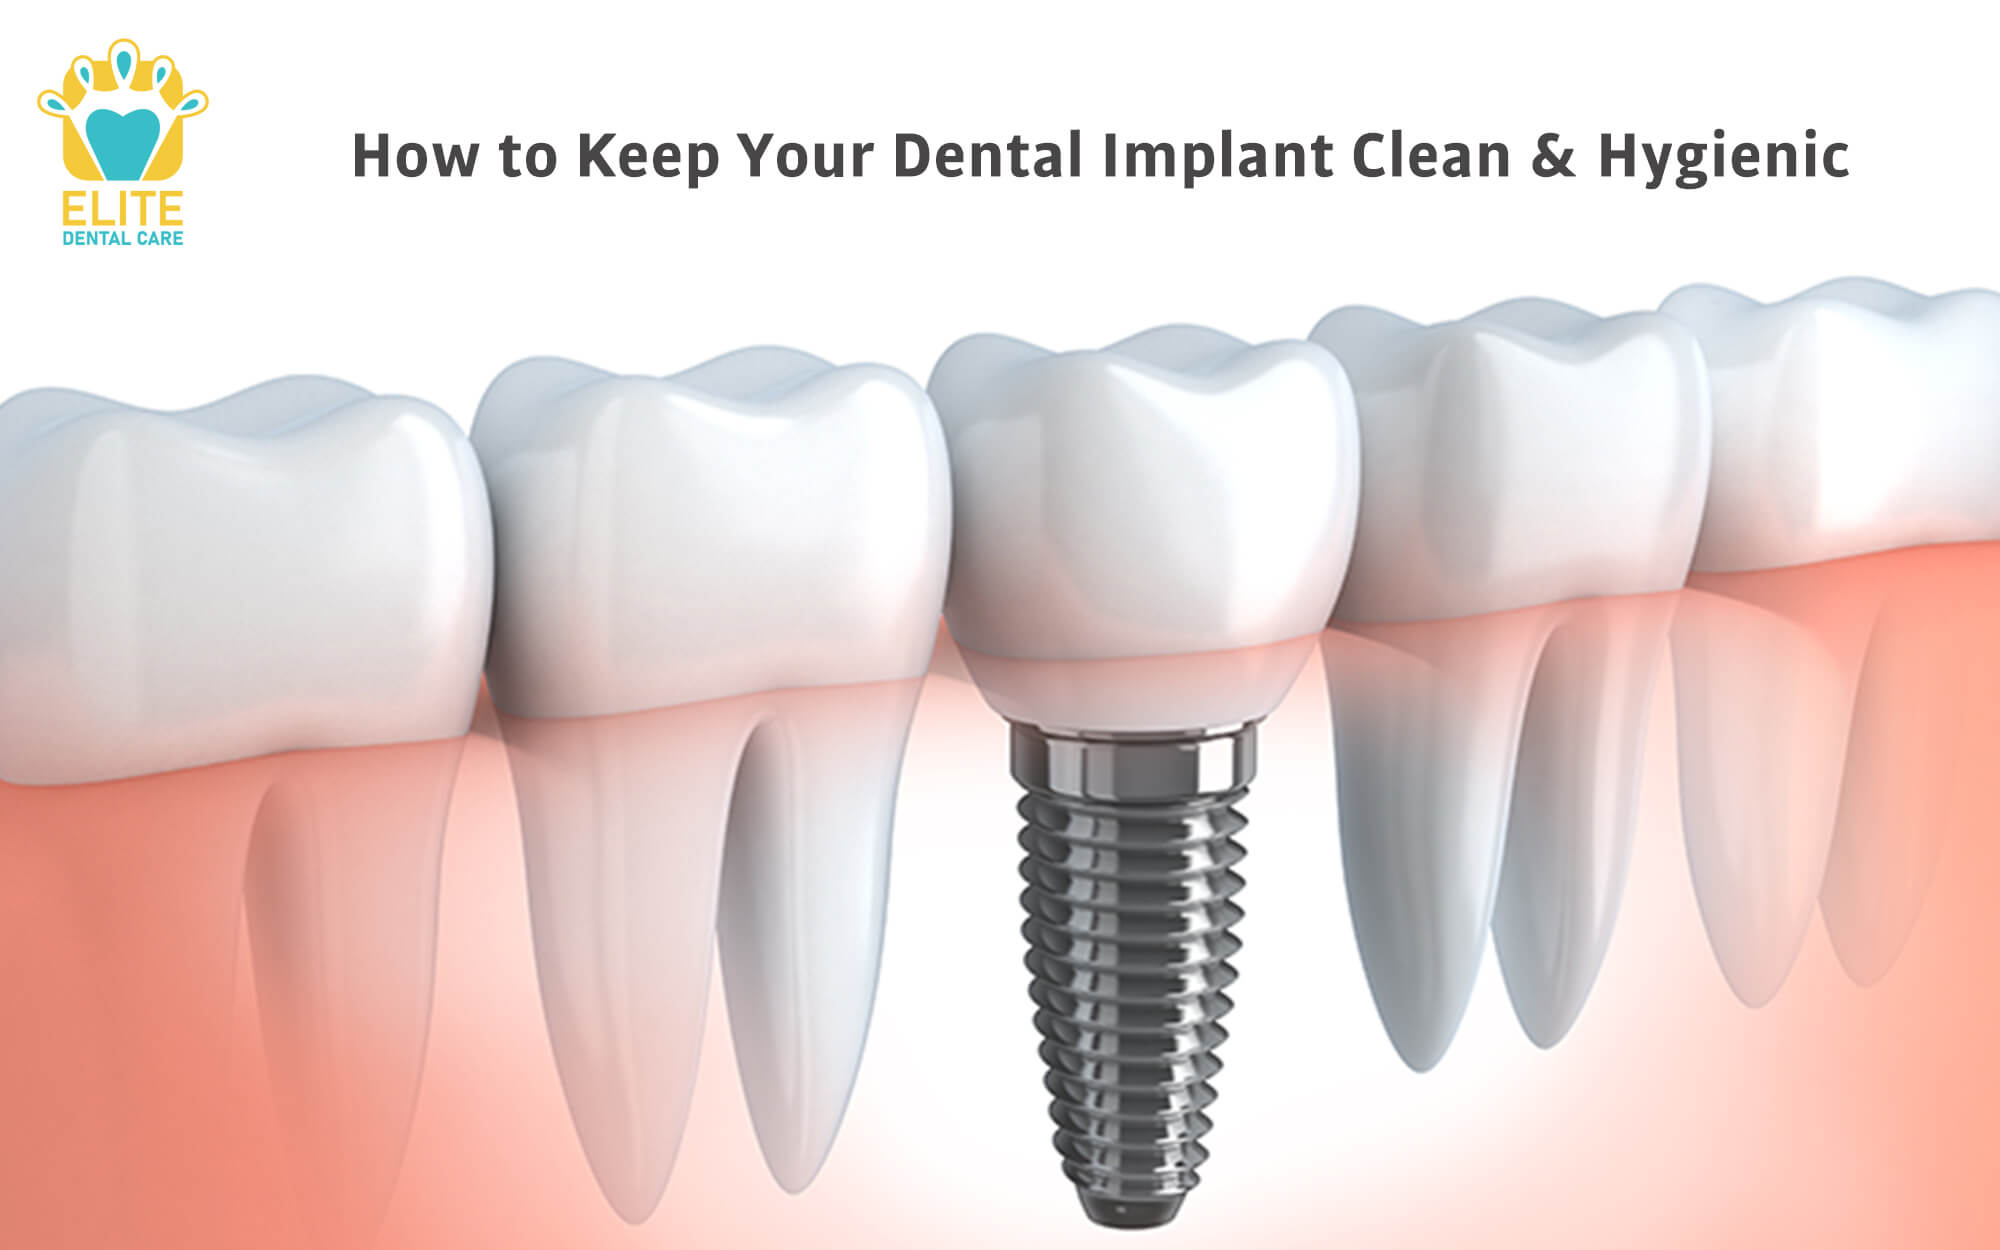 HOW TO KEEP YOUR DENTAL IMPLANTS CLEAN & HYGIENIC